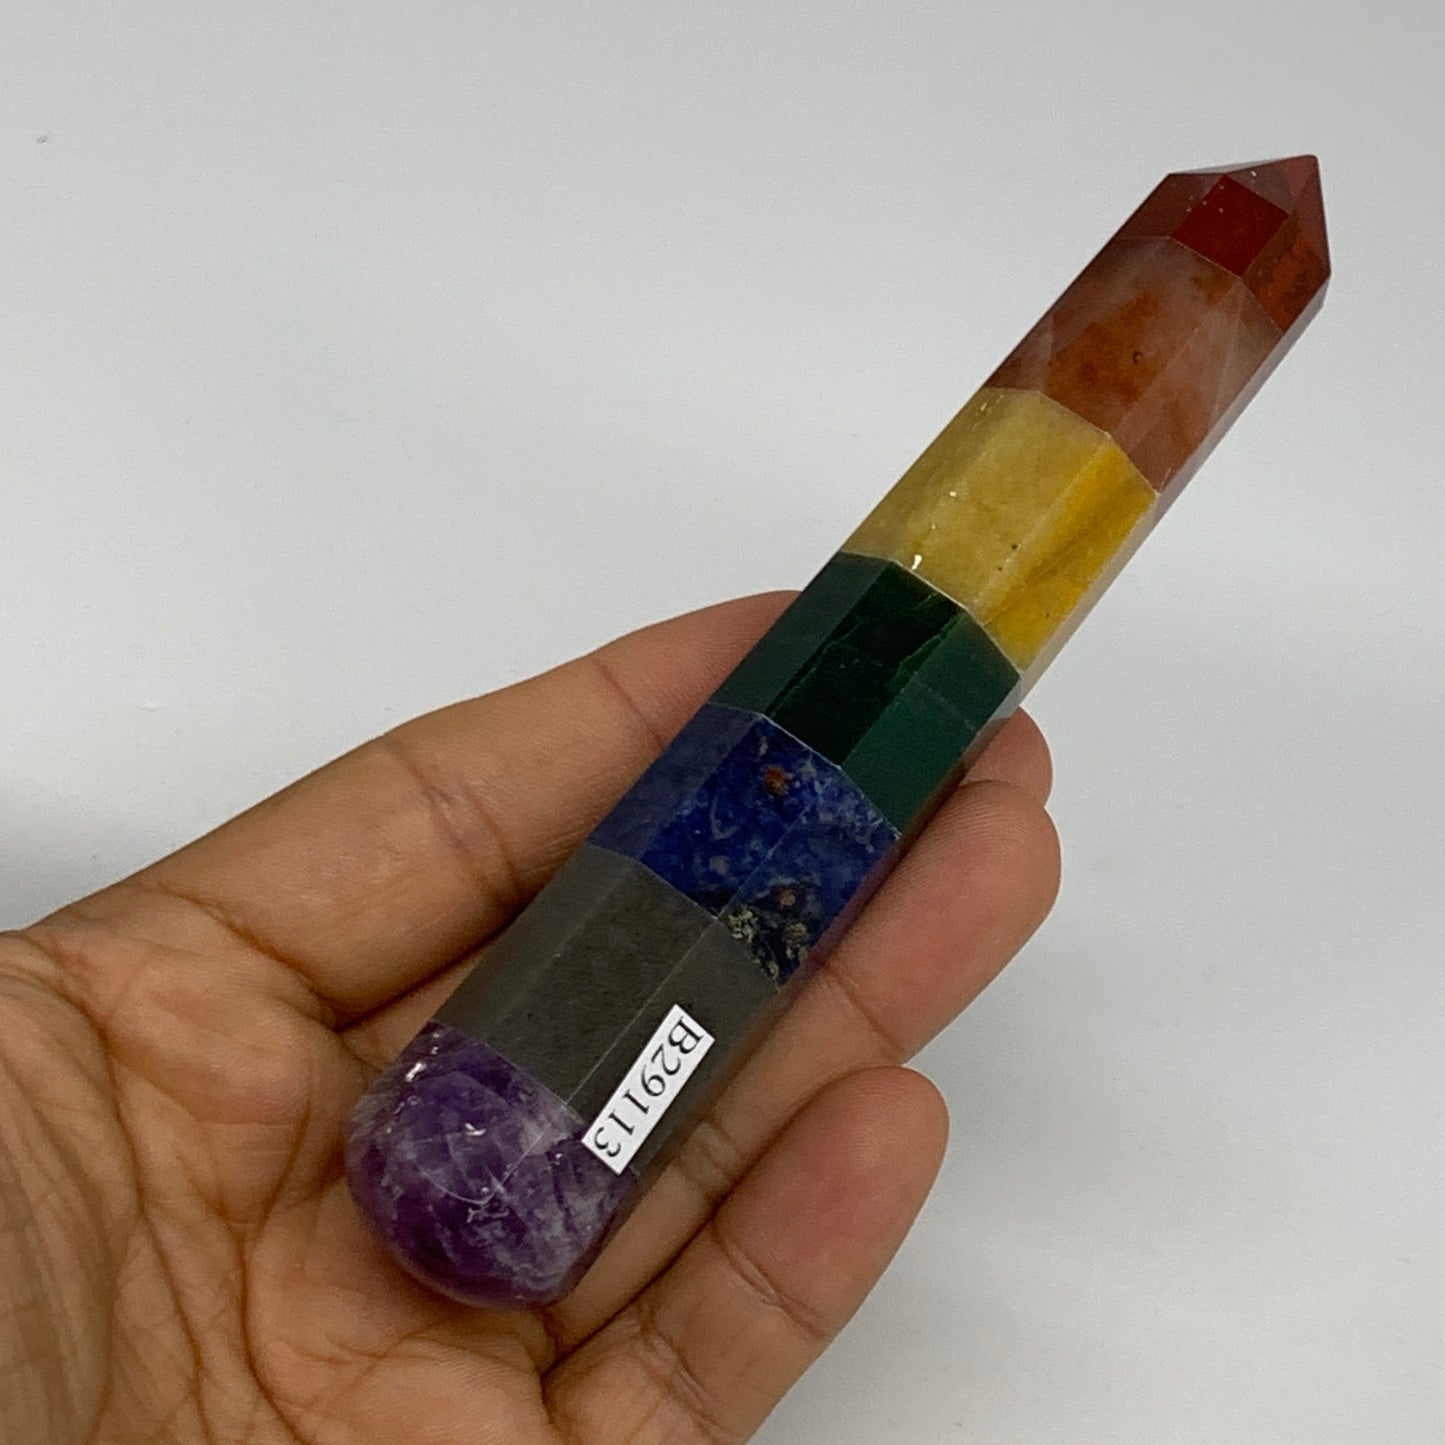 106.4g, 5.1"x0.9", 7 Chakra Point Wand Obelisk Point Crystal from India, B29113